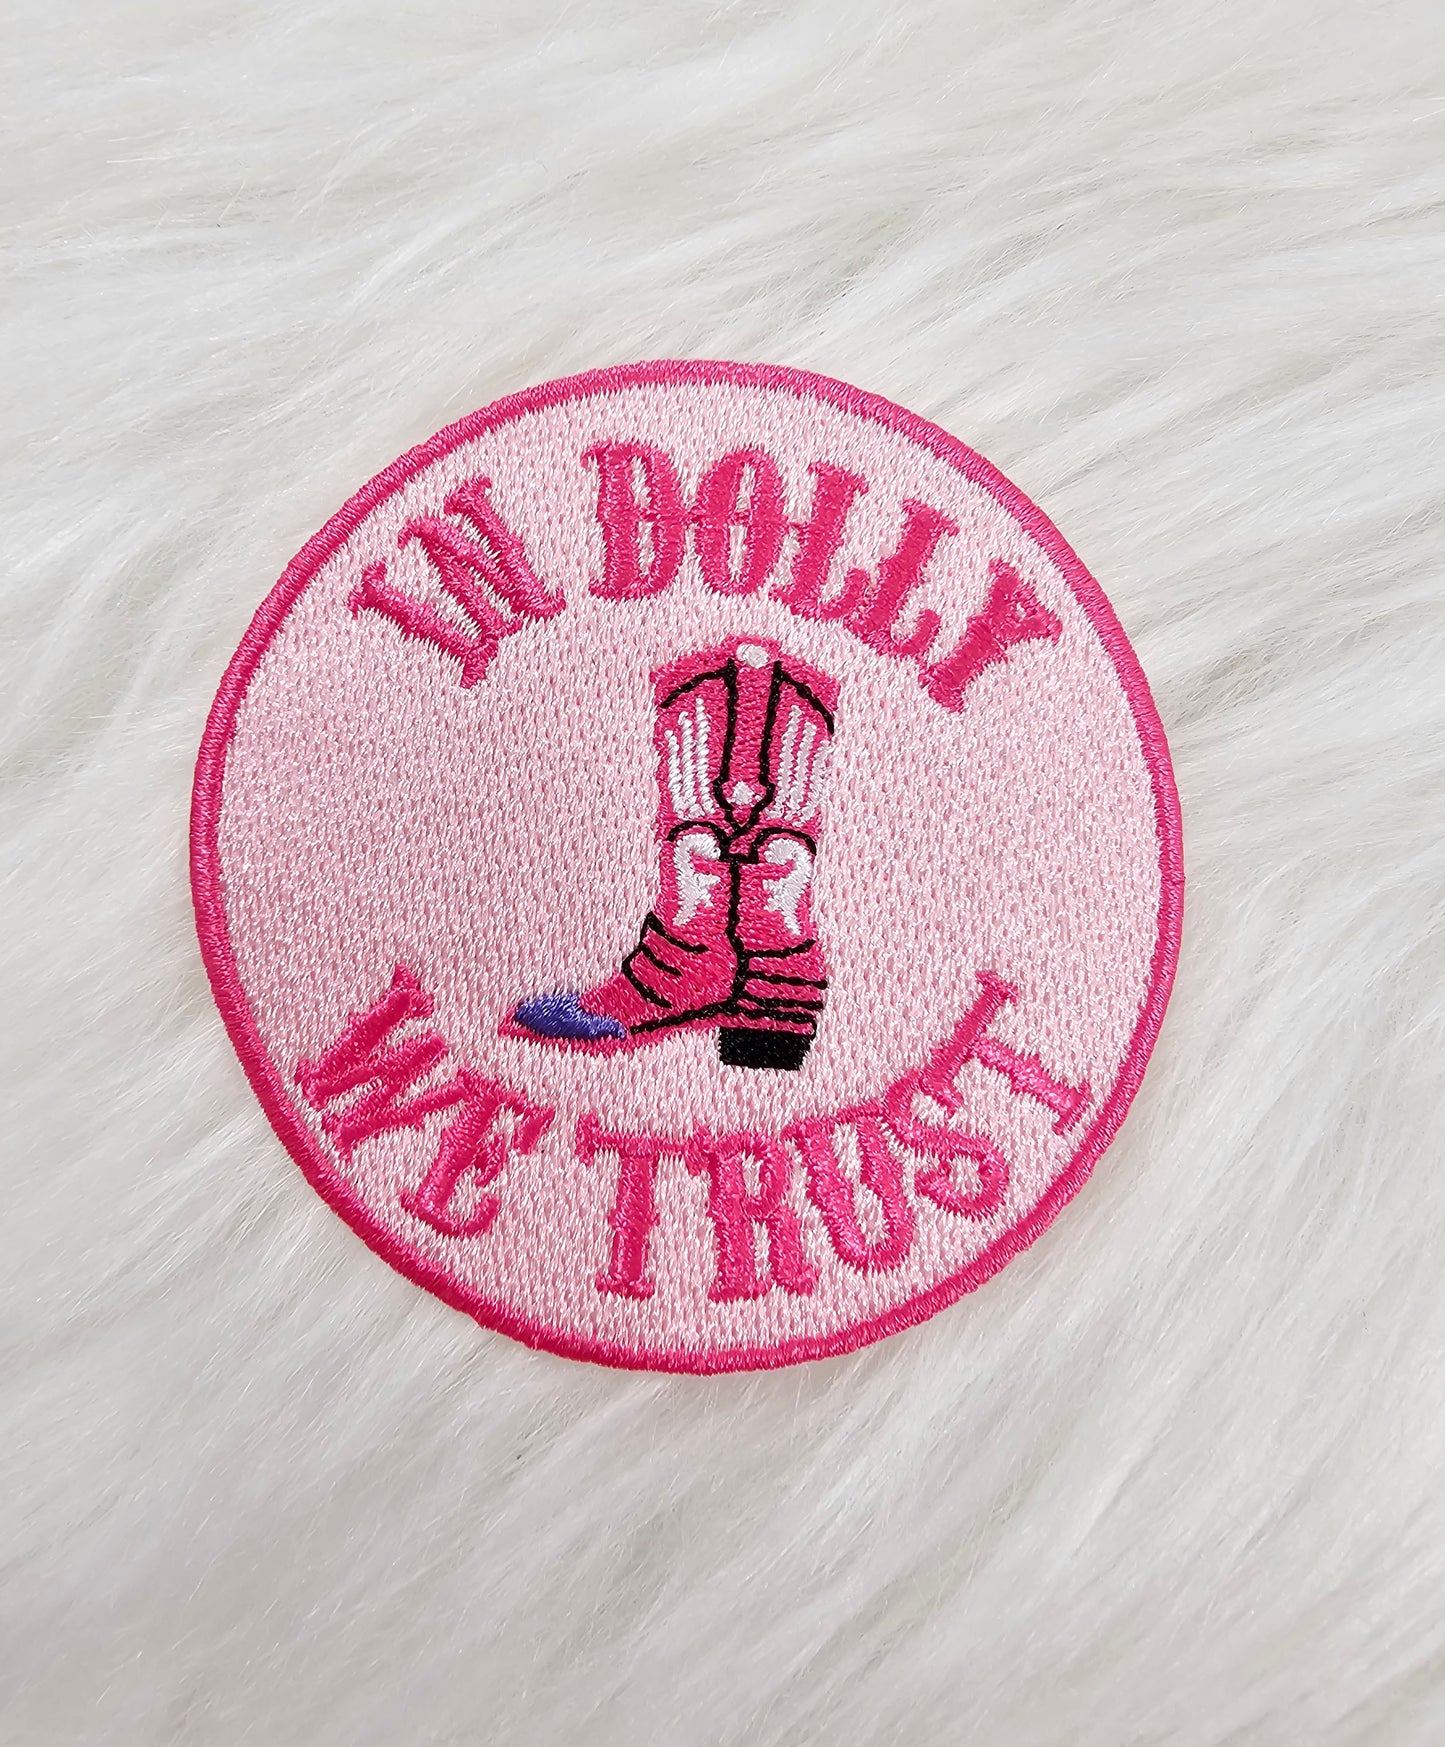 'In Dolly We Trust' Pink Embroidery Iron On Patch